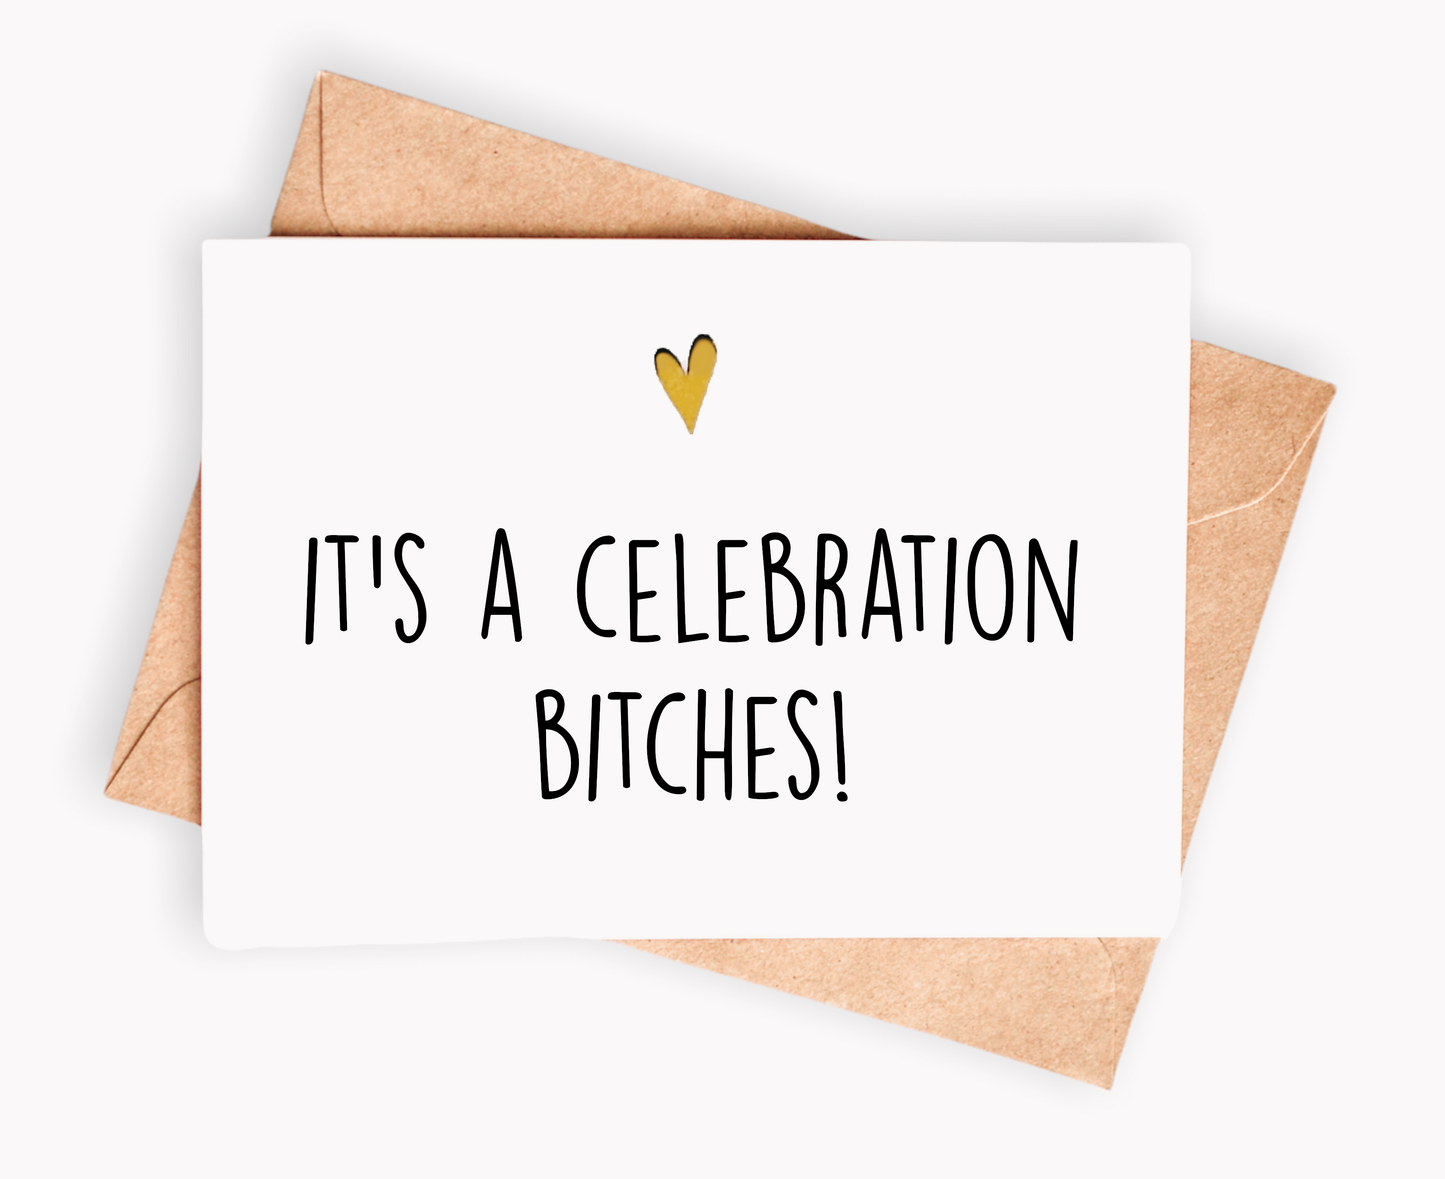 Funny Birthday card - It's a celebration bitches